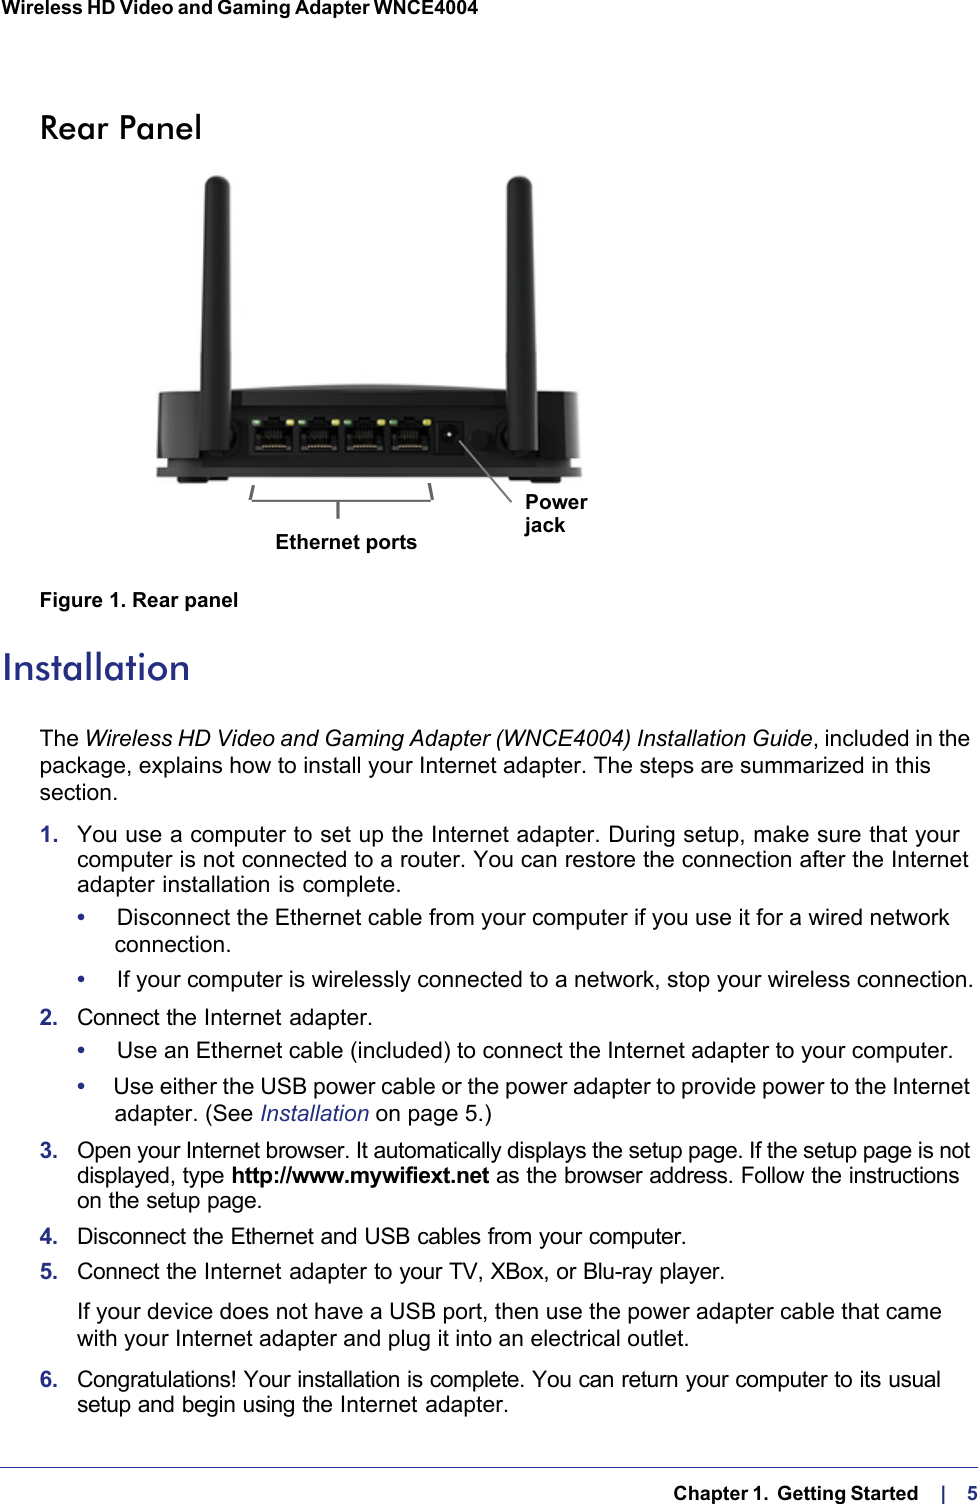   Chapter 1.  Getting Started    |    5Wireless HD Video and Gaming Adapter WNCE4004 Rear PanelEthernet port ResetbuttonPowerjackEthernet portsFigure 1. Rear panelInstallationThe Wireless HD Video and Gaming Adapter (WNCE4004) Installation Guide, included in the package, explains how to install your Internet adapter. The steps are summarized in this section. 1.  You use a computer to set up the Internet adapter. During setup, make sure that your computer is not connected to a router. You can restore the connection after the Internet adapter installation is complete.•     Disconnect the Ethernet cable from your computer if you use it for a wired network connection.•     If your computer is wirelessly connected to a network, stop your wireless connection.2.  Connect the Internet adapter.•     Use an Ethernet cable (included) to connect the Internet adapter to your computer.•     Use either the USB power cable or the power adapter to provide power to the Internet adapter. (See Installation on page  5.)3.  Open your Internet browser. It automatically displays the setup page. If the setup page is not displayed, type http://www.mywifiext.net as the browser address. Follow the instructions on the setup page.4.  Disconnect the Ethernet and USB cables from your computer.5.  Connect the Internet adapter to your TV, XBox, or Blu-ray player.If your device does not have a USB port, then use the power adapter cable that came with your Internet adapter and plug it into an electrical outlet.6.  Congratulations! Your installation is complete. You can return your computer to its usual setup and begin using the Internet adapter.